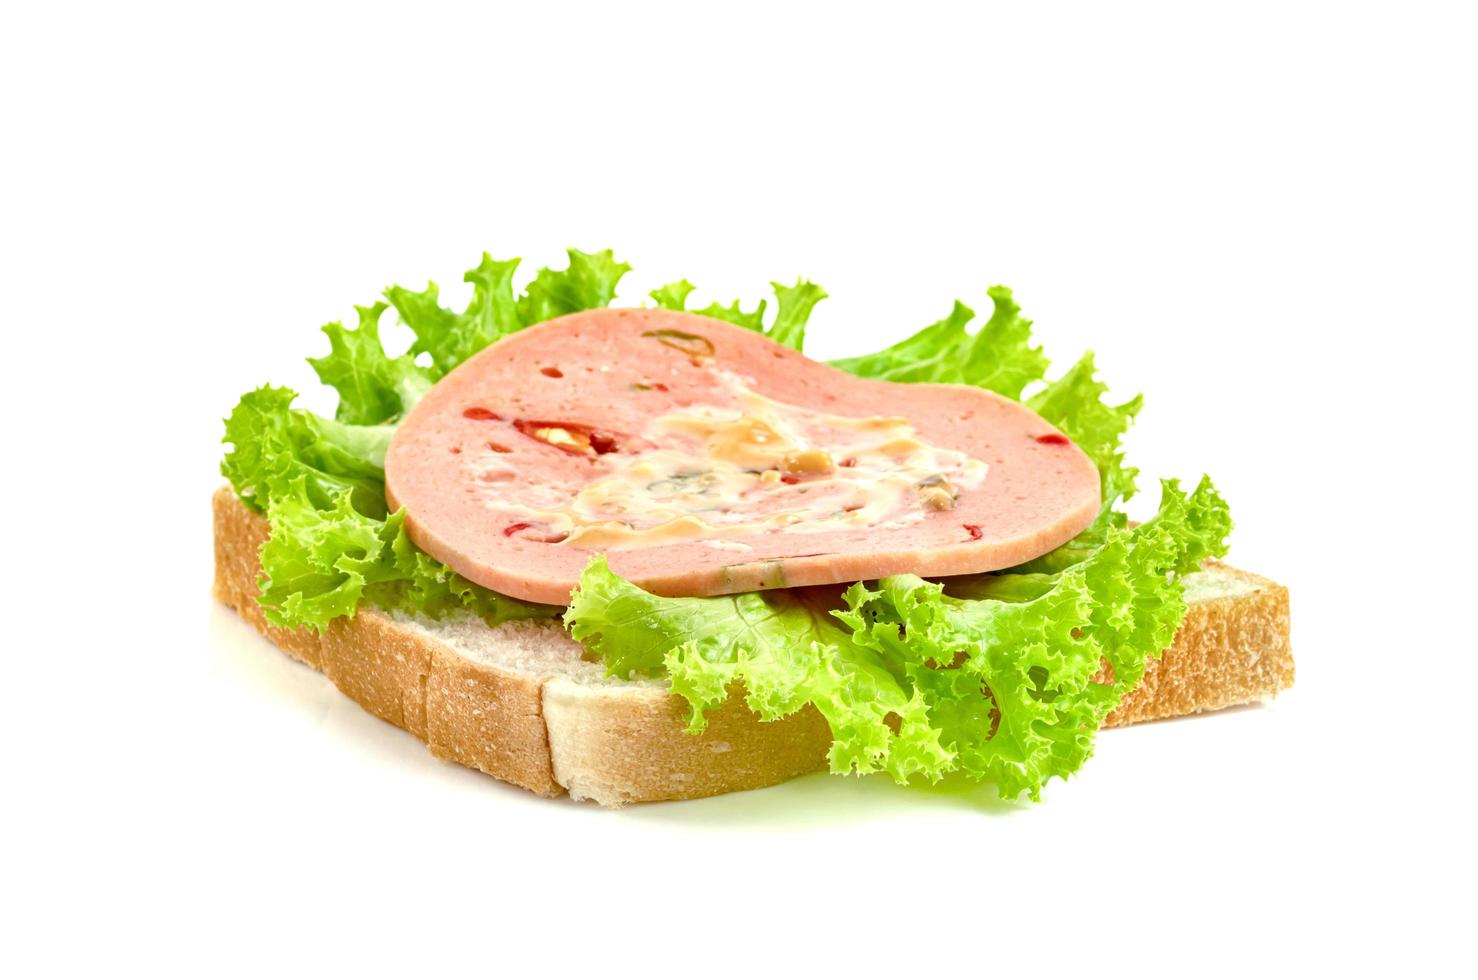 bologna sliced with bread and lettuce leaf isolated on white background photo